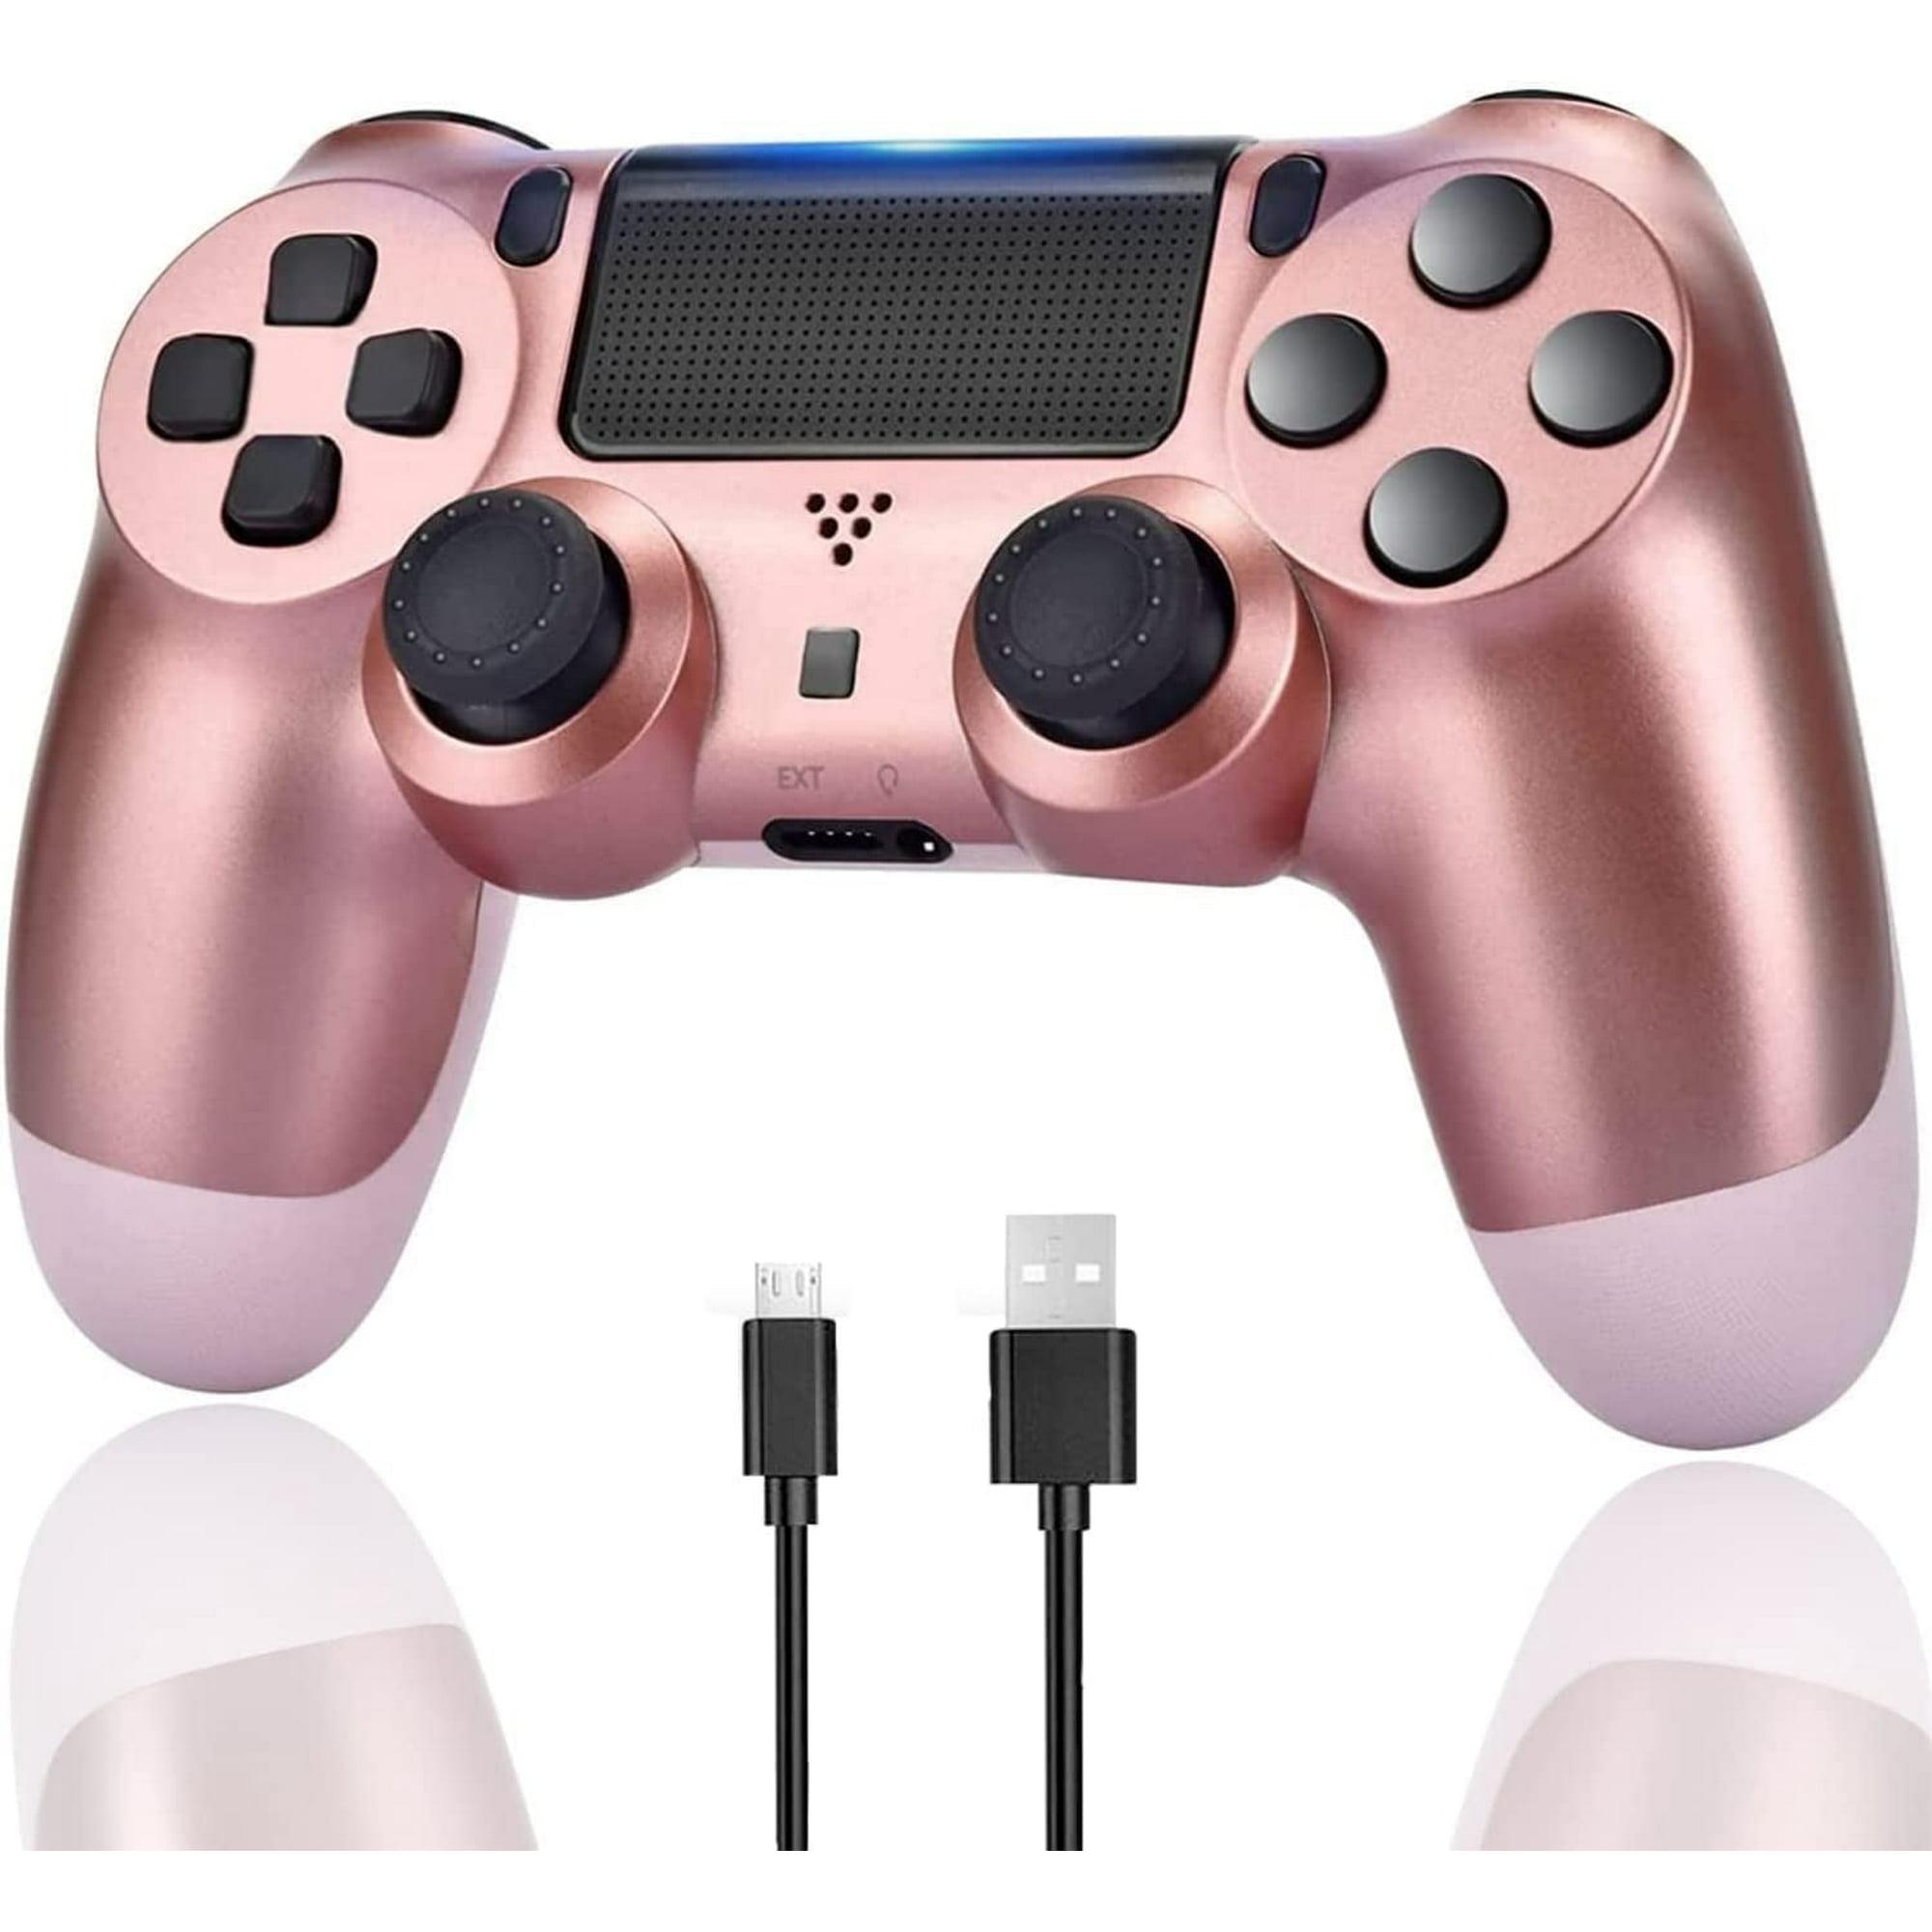 SPBPQY Wireless Controller with PS4/PS4 Pro/PS4 Rose Gold Walmart.com